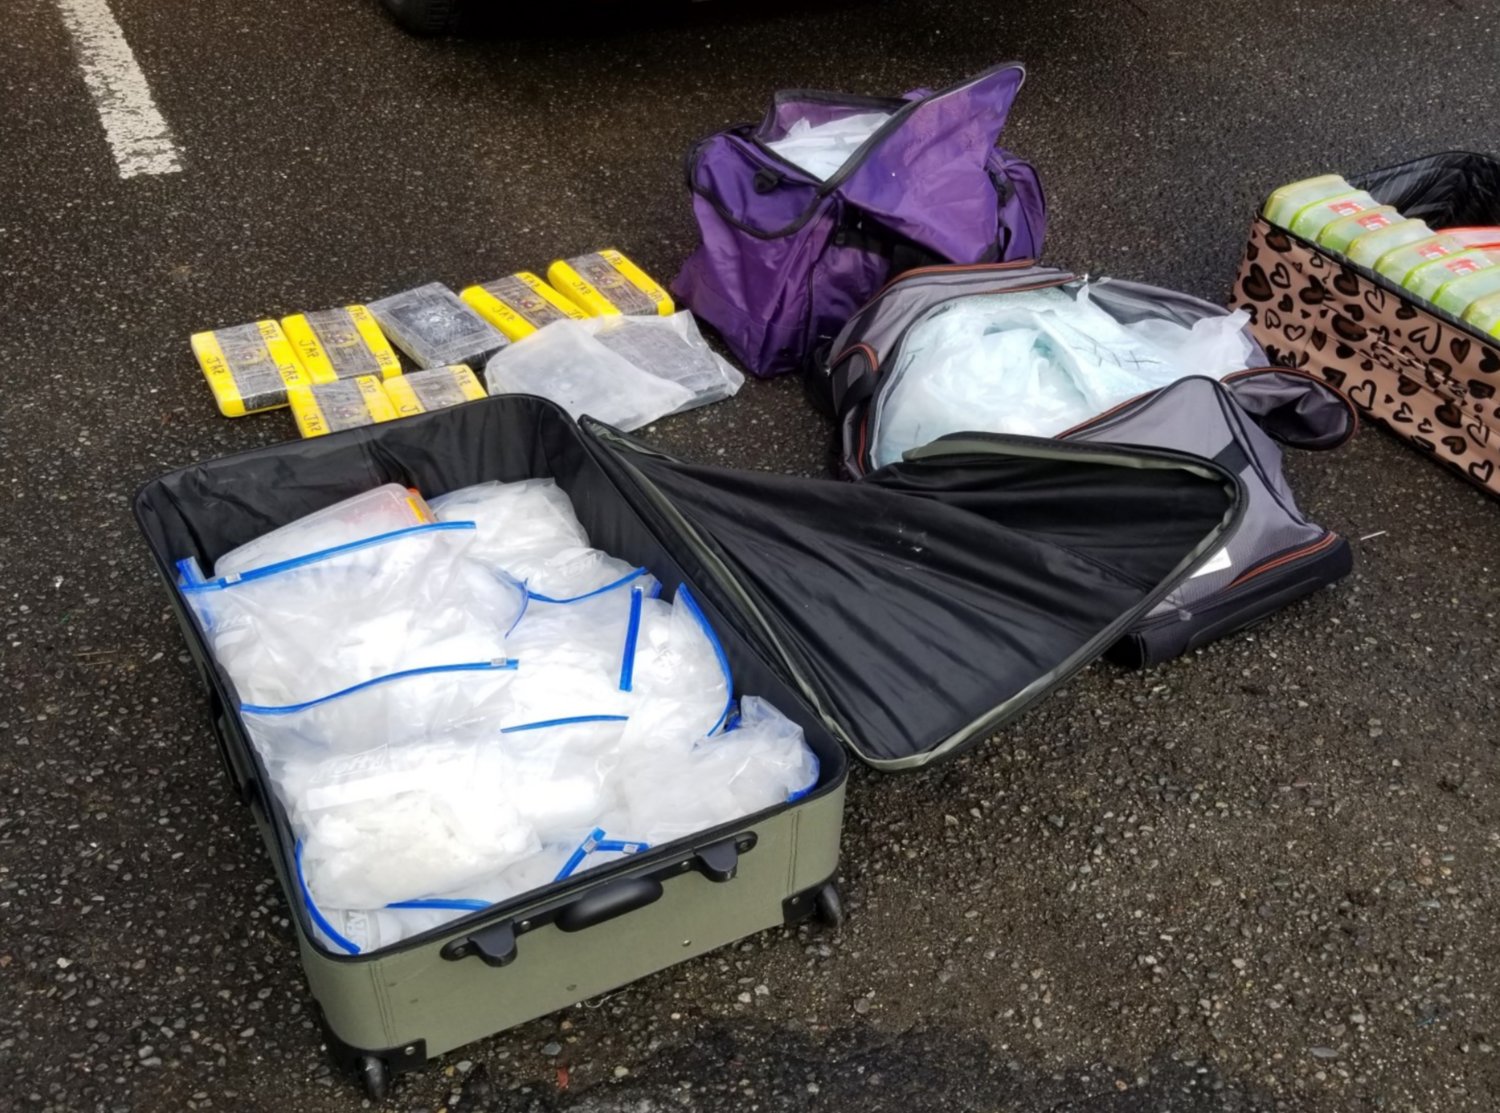 A 26-year-old Mexican national was arrested Wednesday after a traffic stop led to a large amount of drugs being seized, according to the Centralia police Department. 